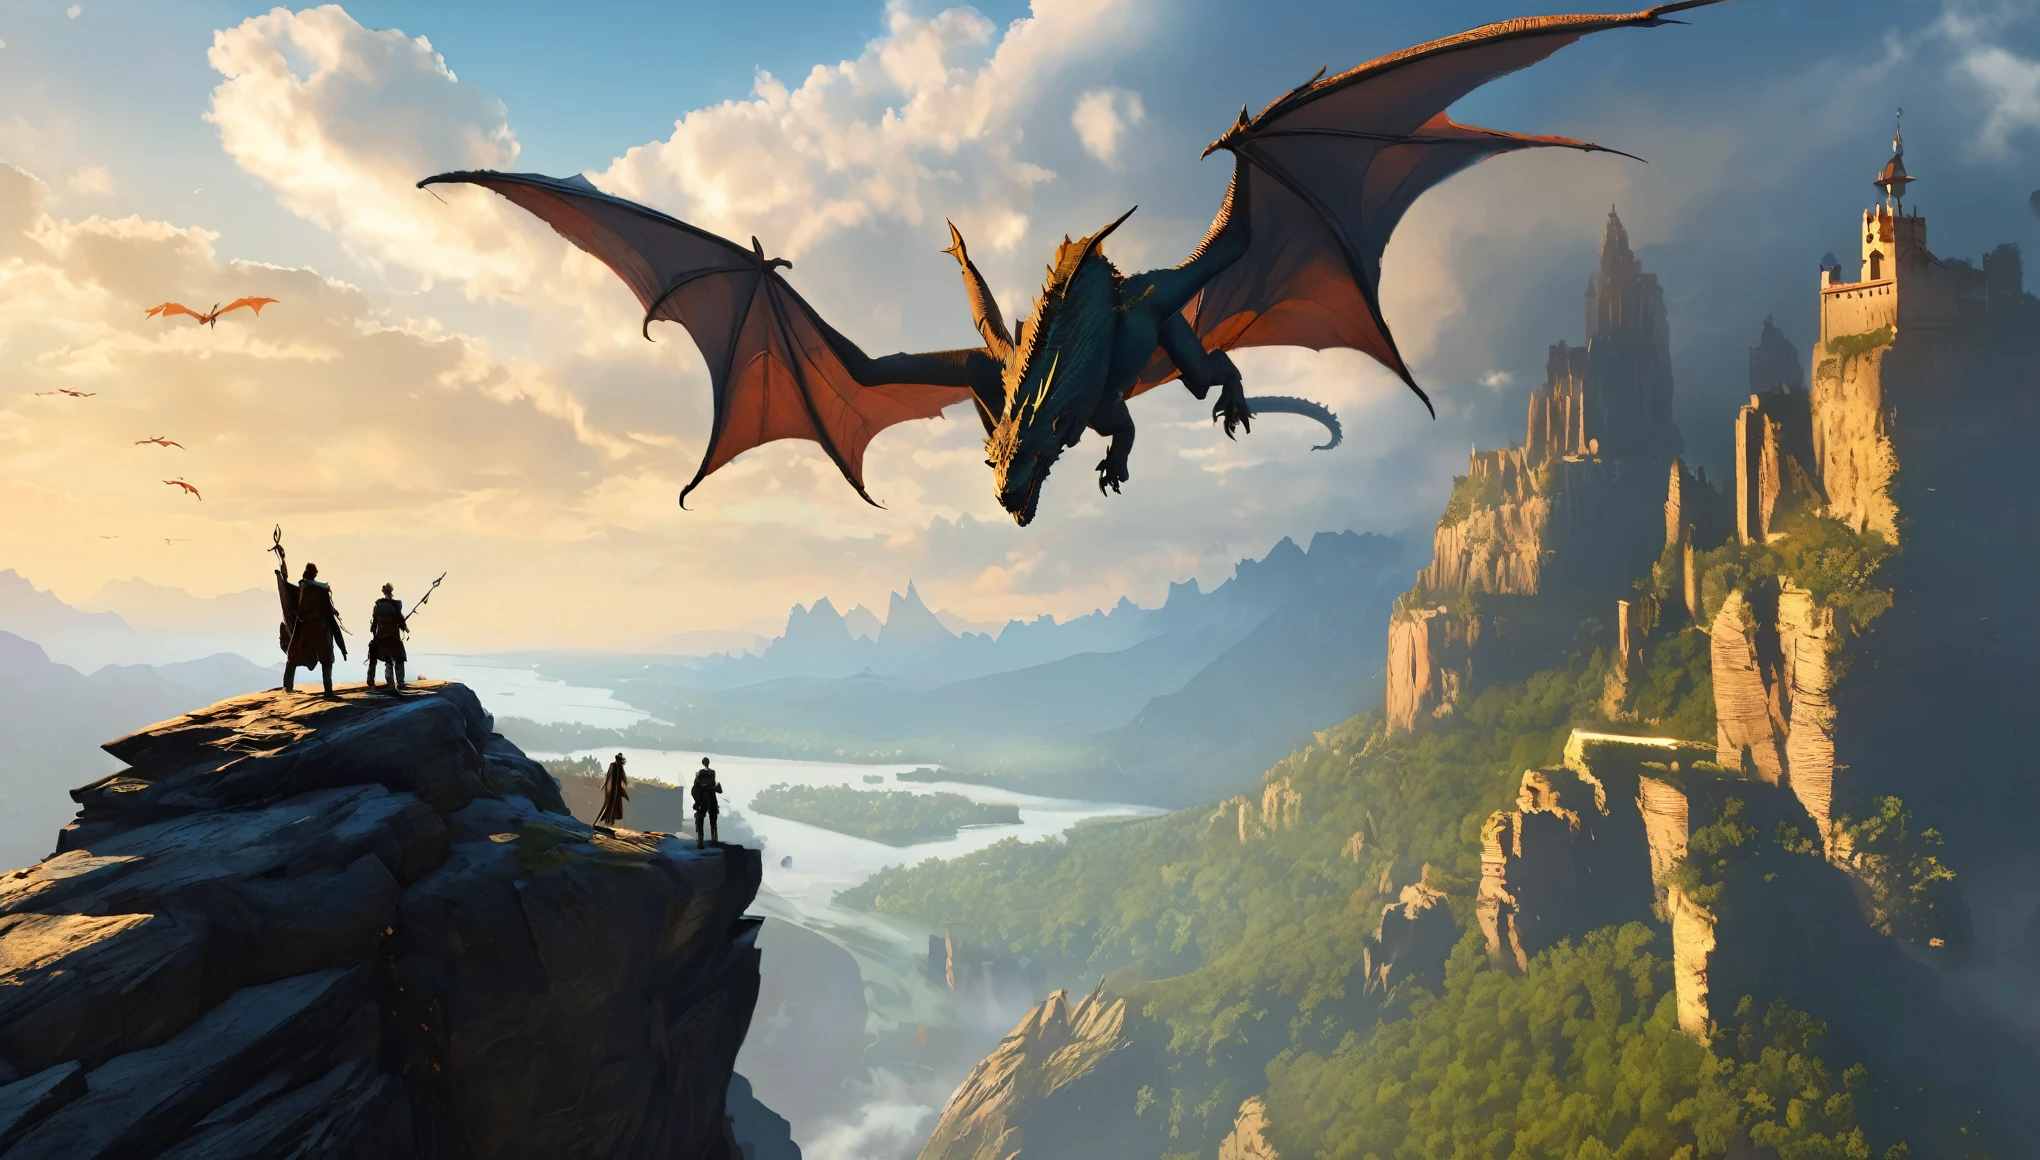 a group of people standing on a cliff with dragon flying above, concept art by Raphael Lacoste, trending on Artstation, fantasy art, dragon age, dragon age inquisition, elder scrolls art, medieval fantasy game art, epic elder scrolls art, dragons, dragons flying in the sky, elderscrolls, dragons flying around, hyperrealistic d & d fantasy art